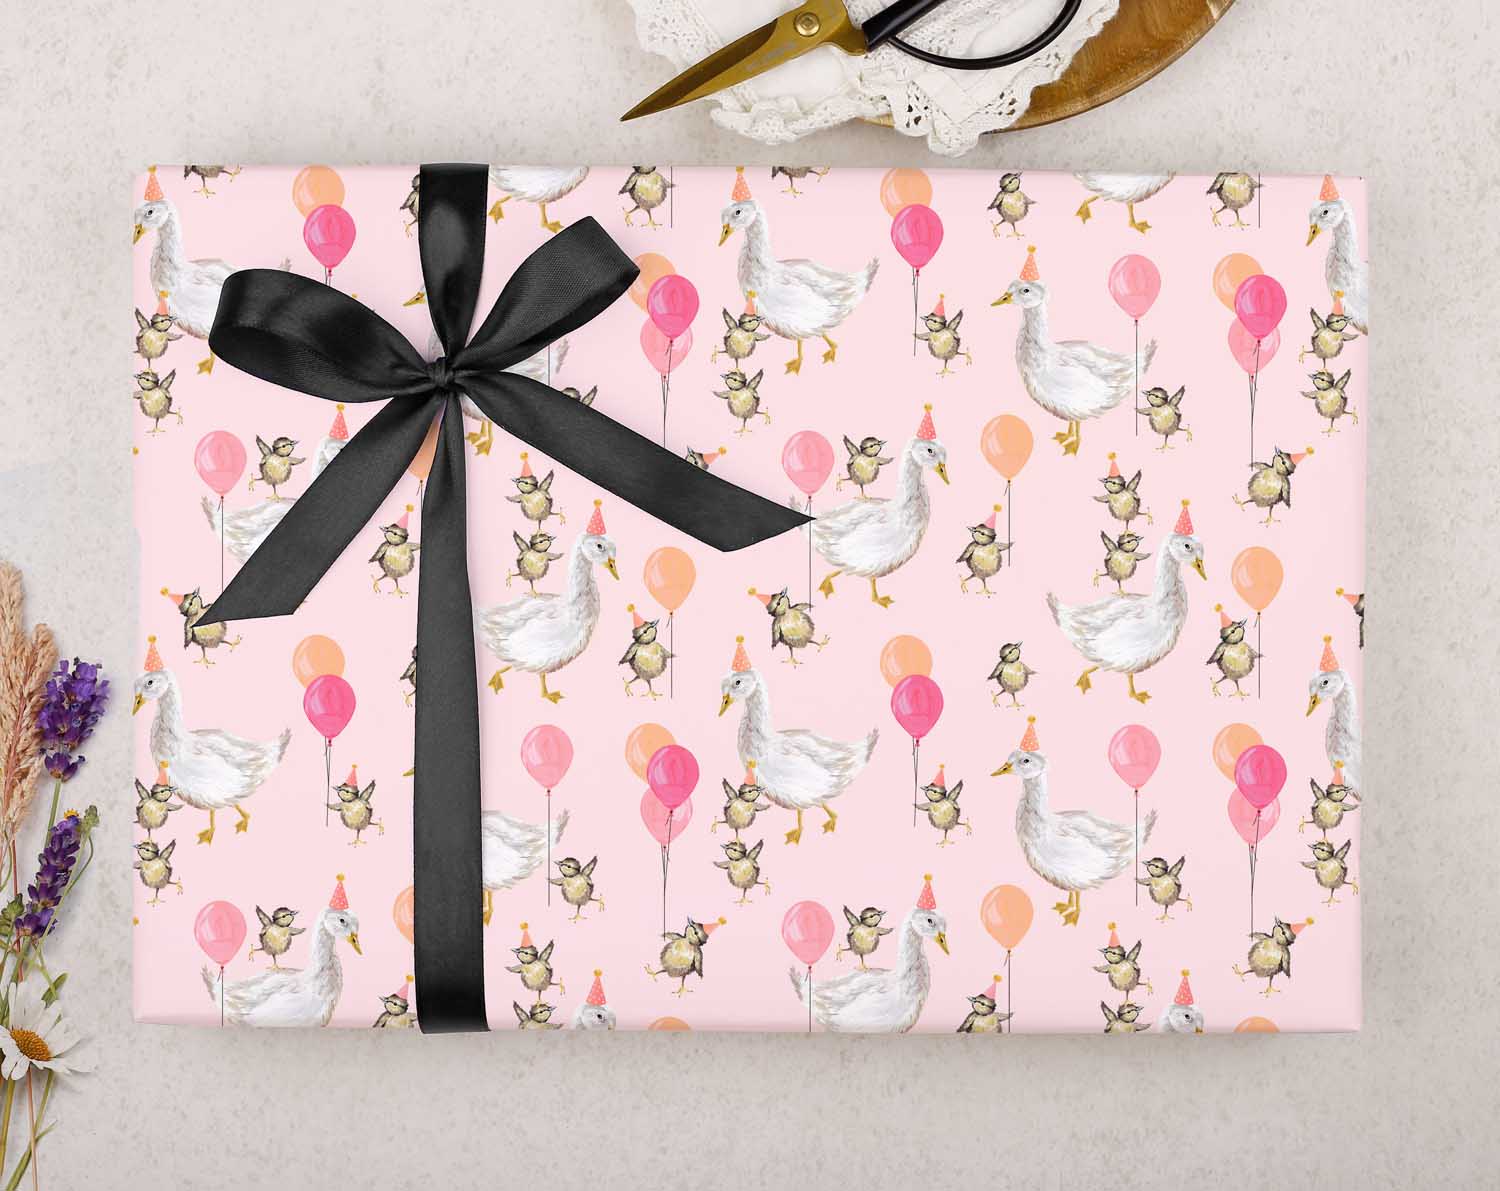 pink celebration Birthday wrapping paper is perfect for wrapping up presents! With its cute Pink Duck, Goose & Baby Chicks holding balloons pattern